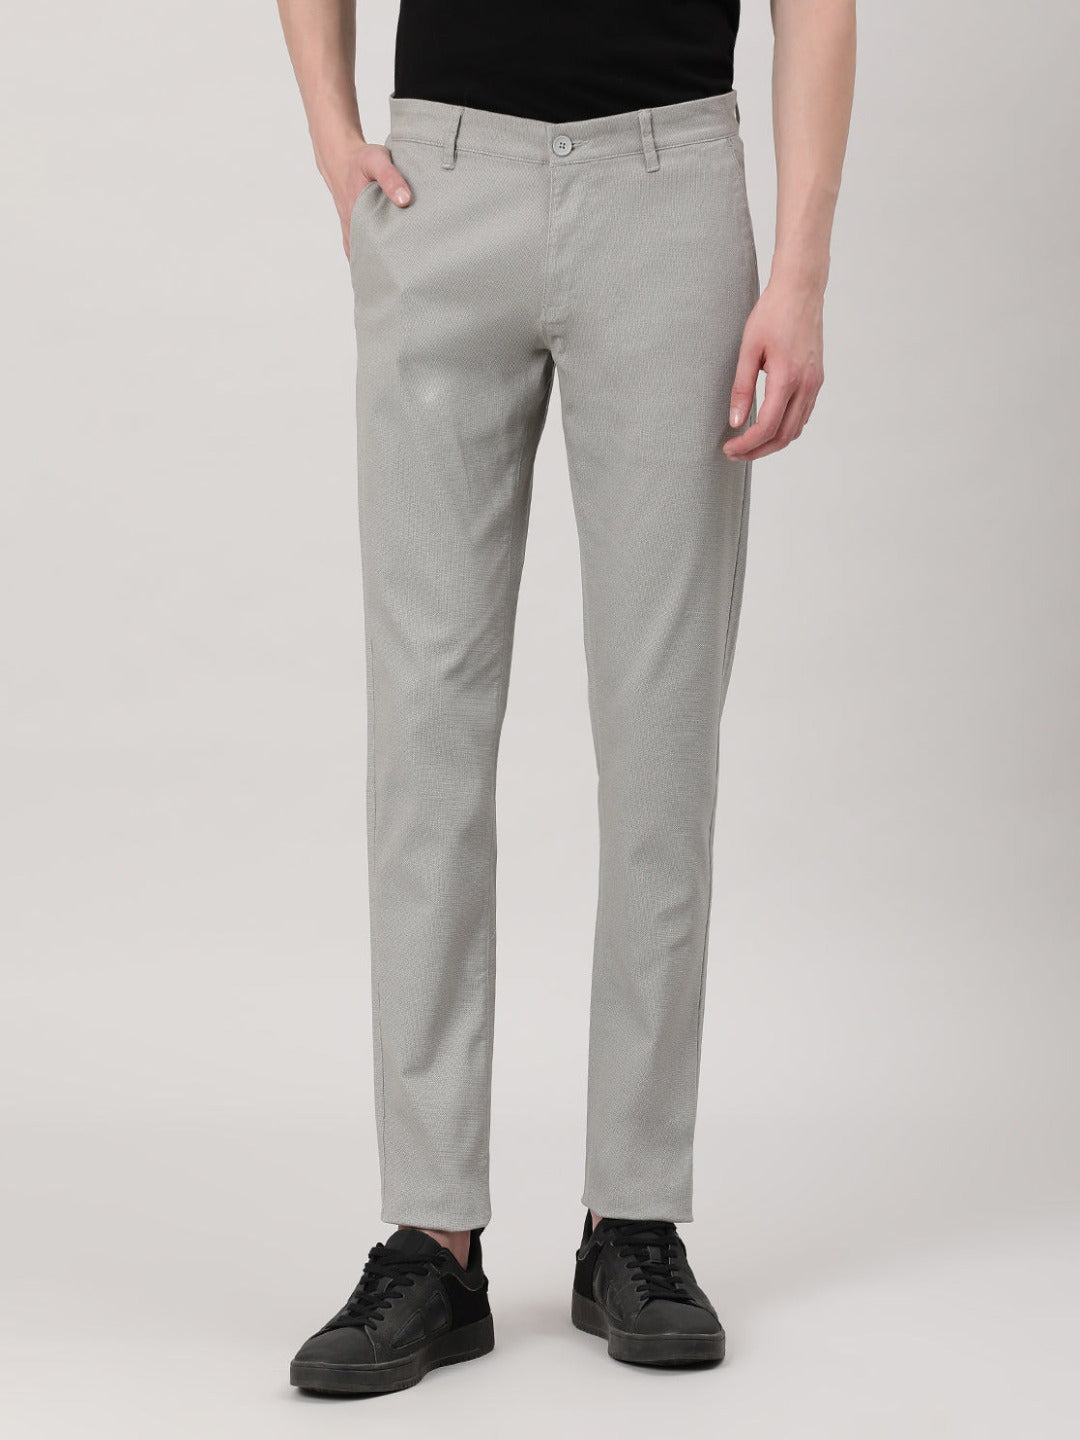 Casual Trim Fit Printed Silver Grey Trousers for Men